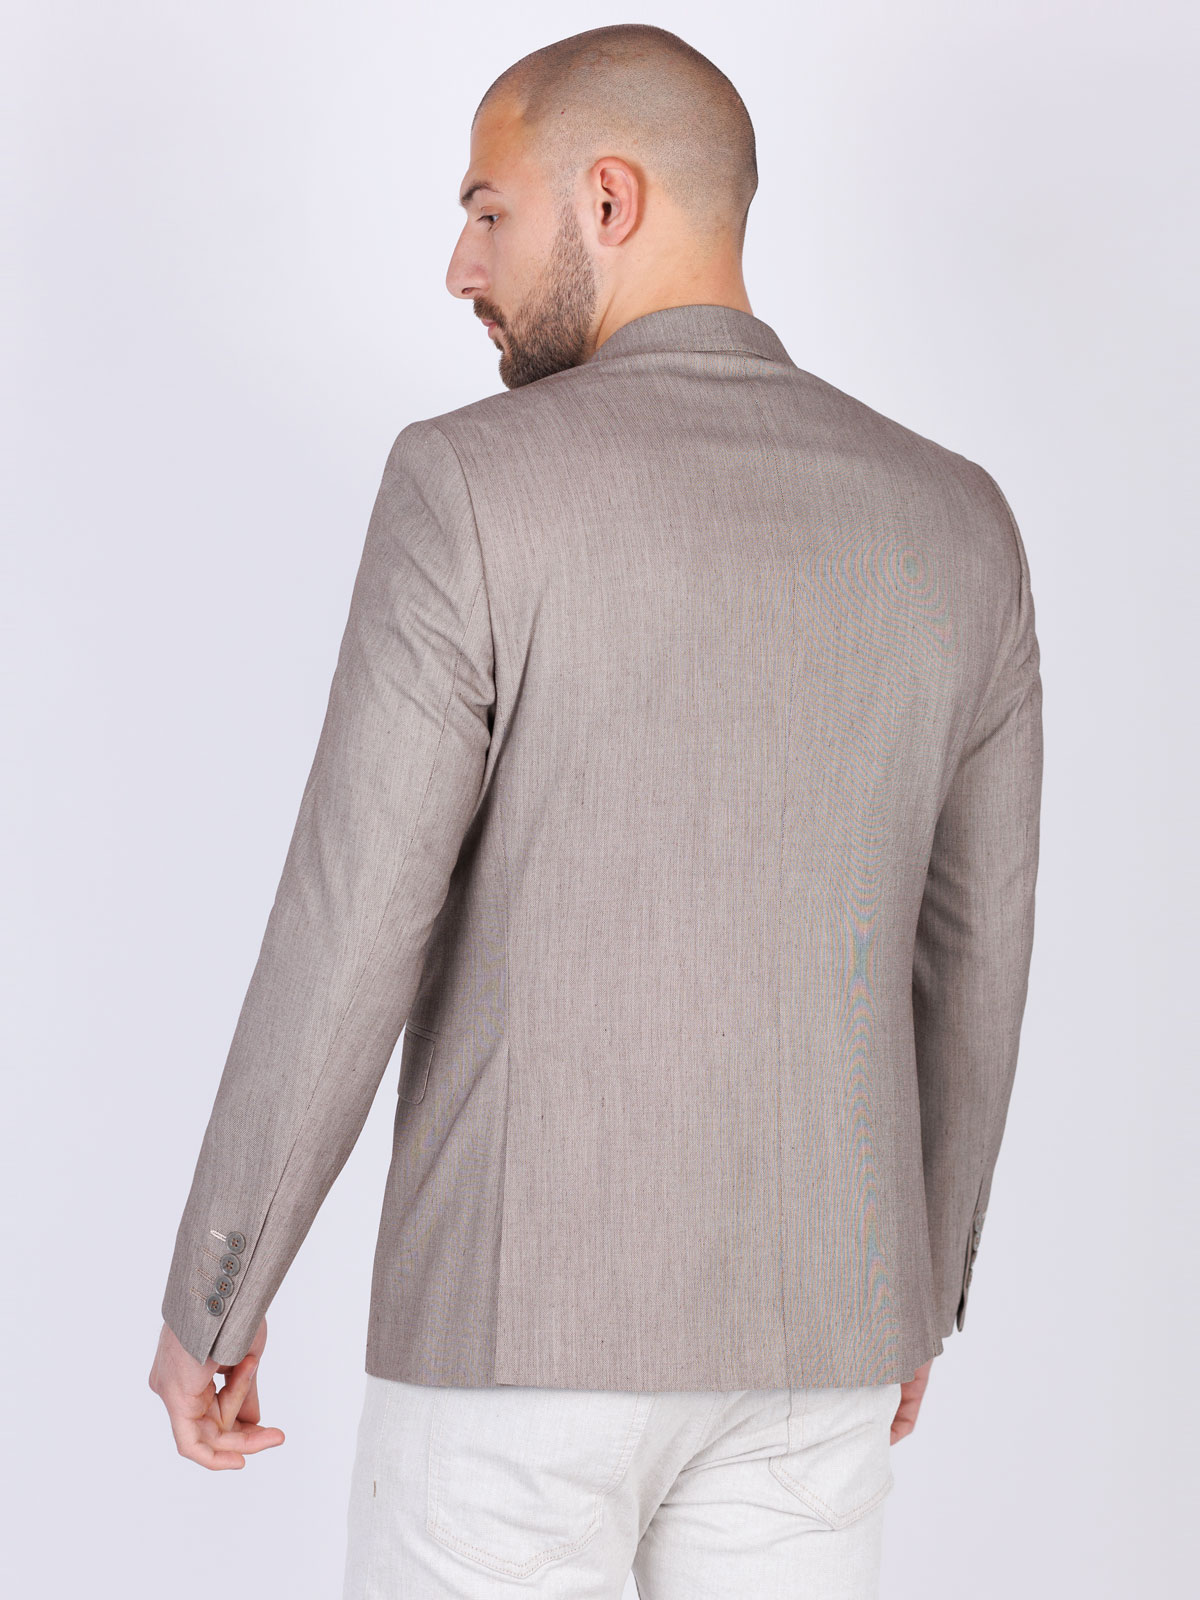 Cotton and linen jacket - 61090 € 83.24 img2